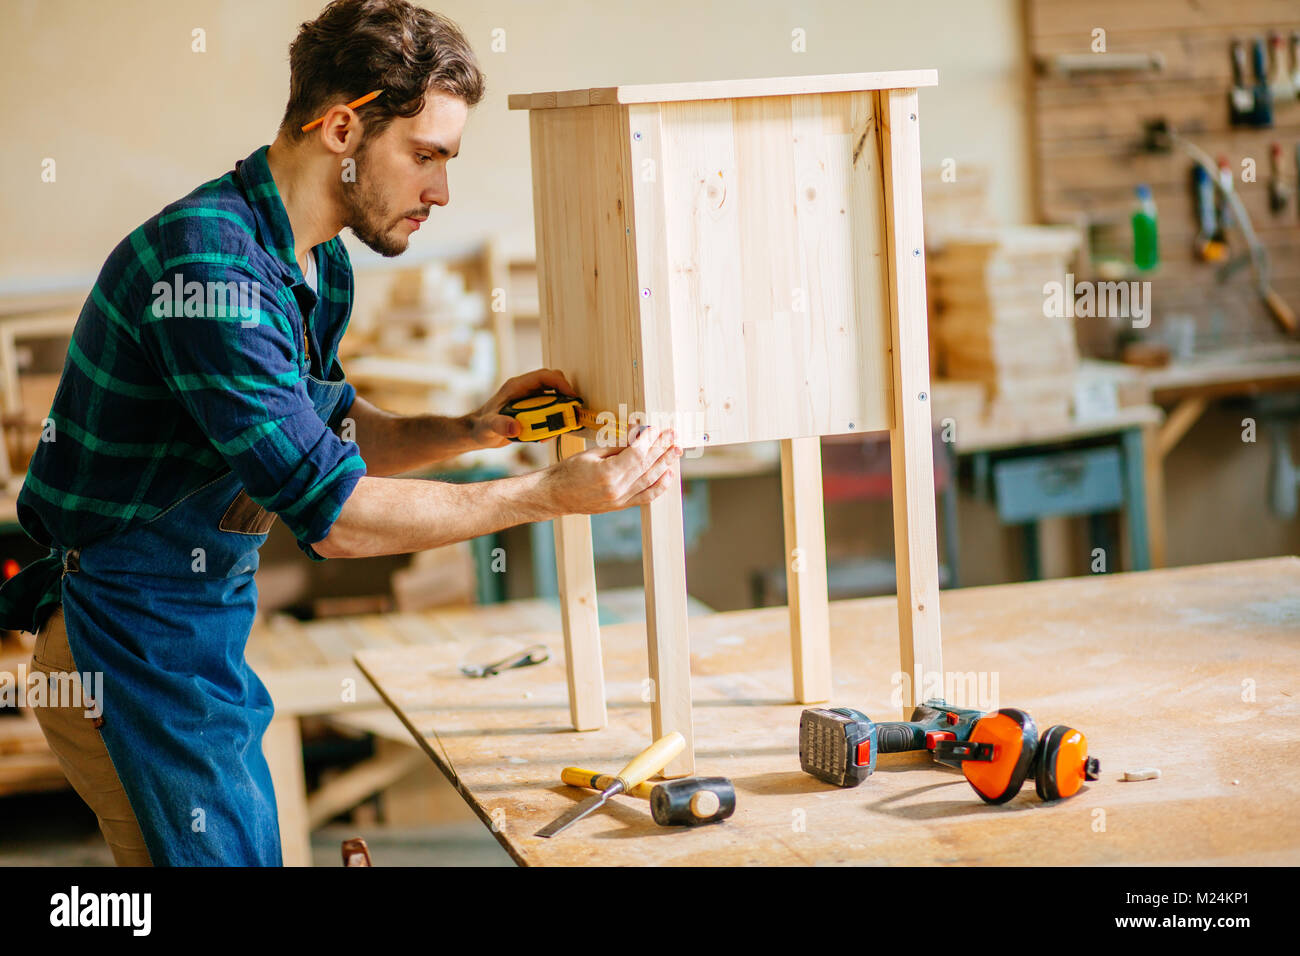 carpenter working in his woodwork or workshop Stock Photo